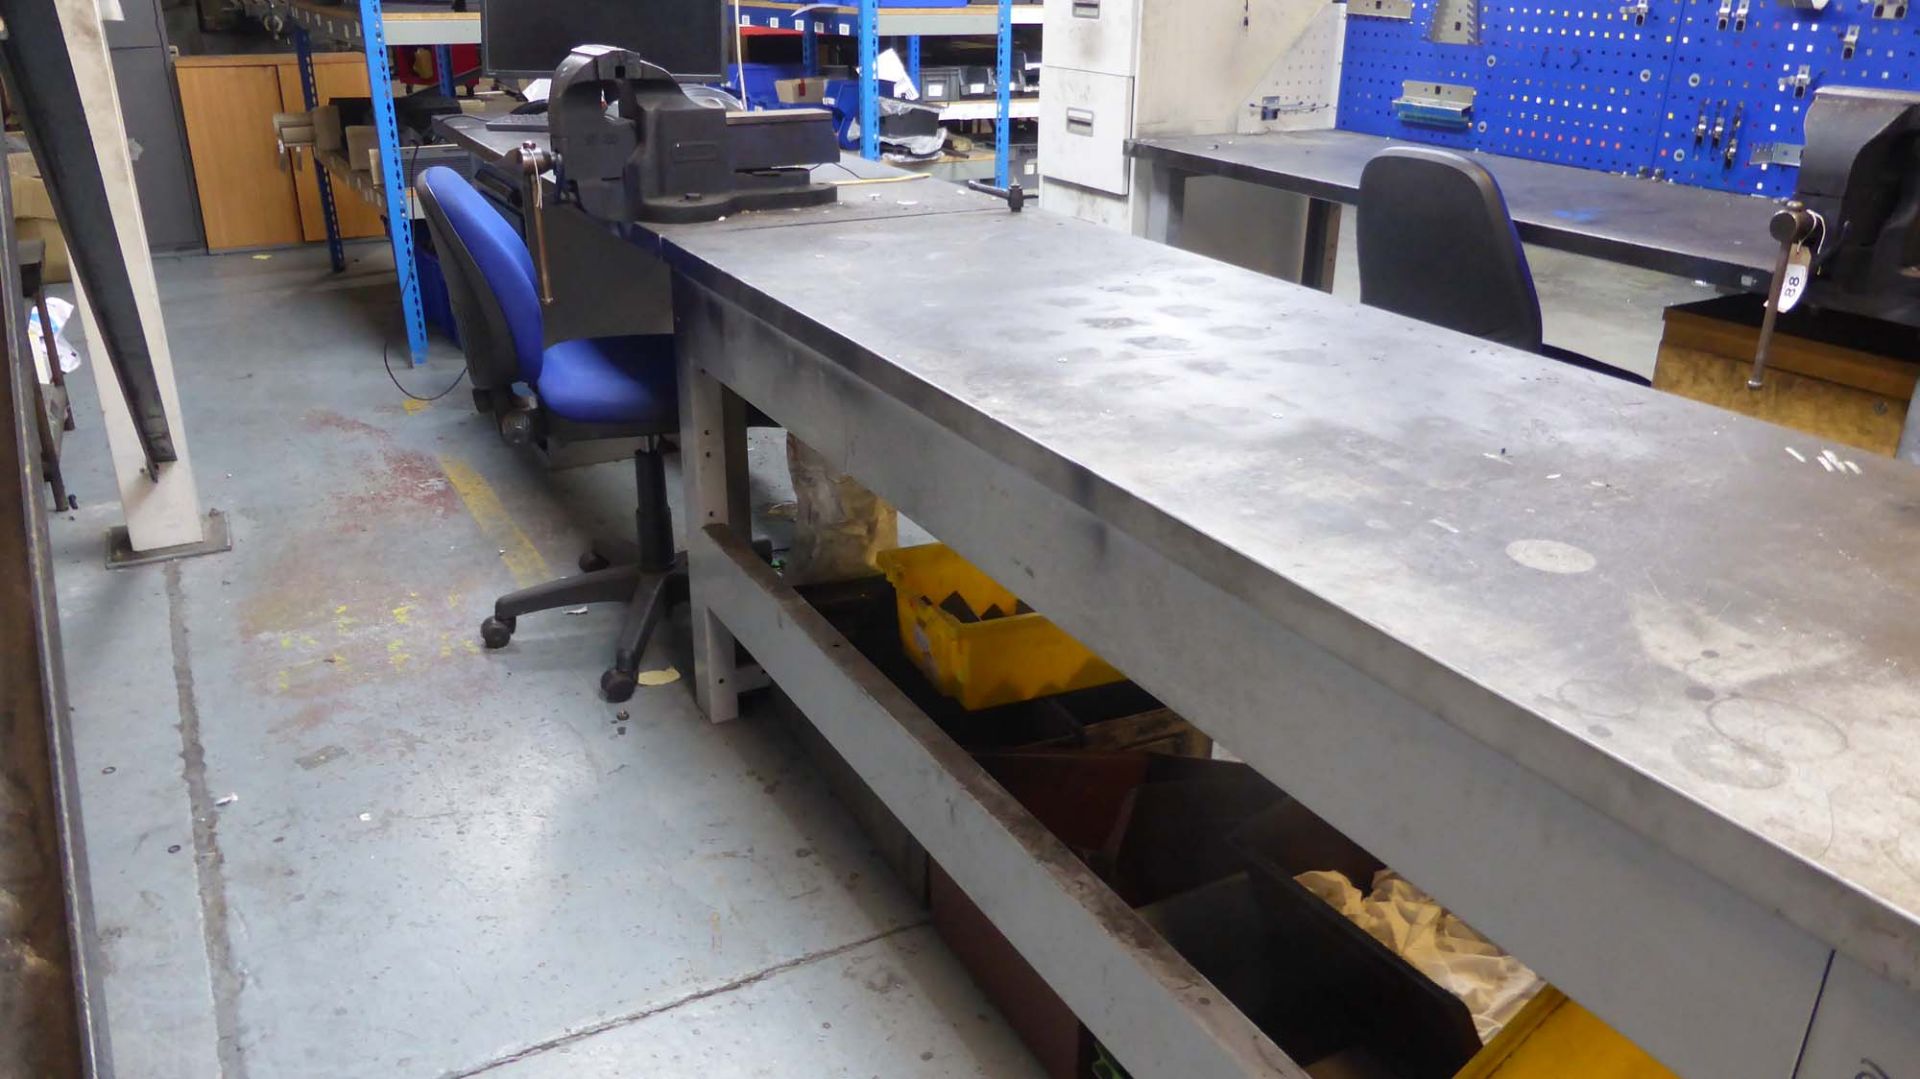 2 heavy duty assembly benches (2m x 0.7m each) with Record number 35 quick release vice and 6 roller